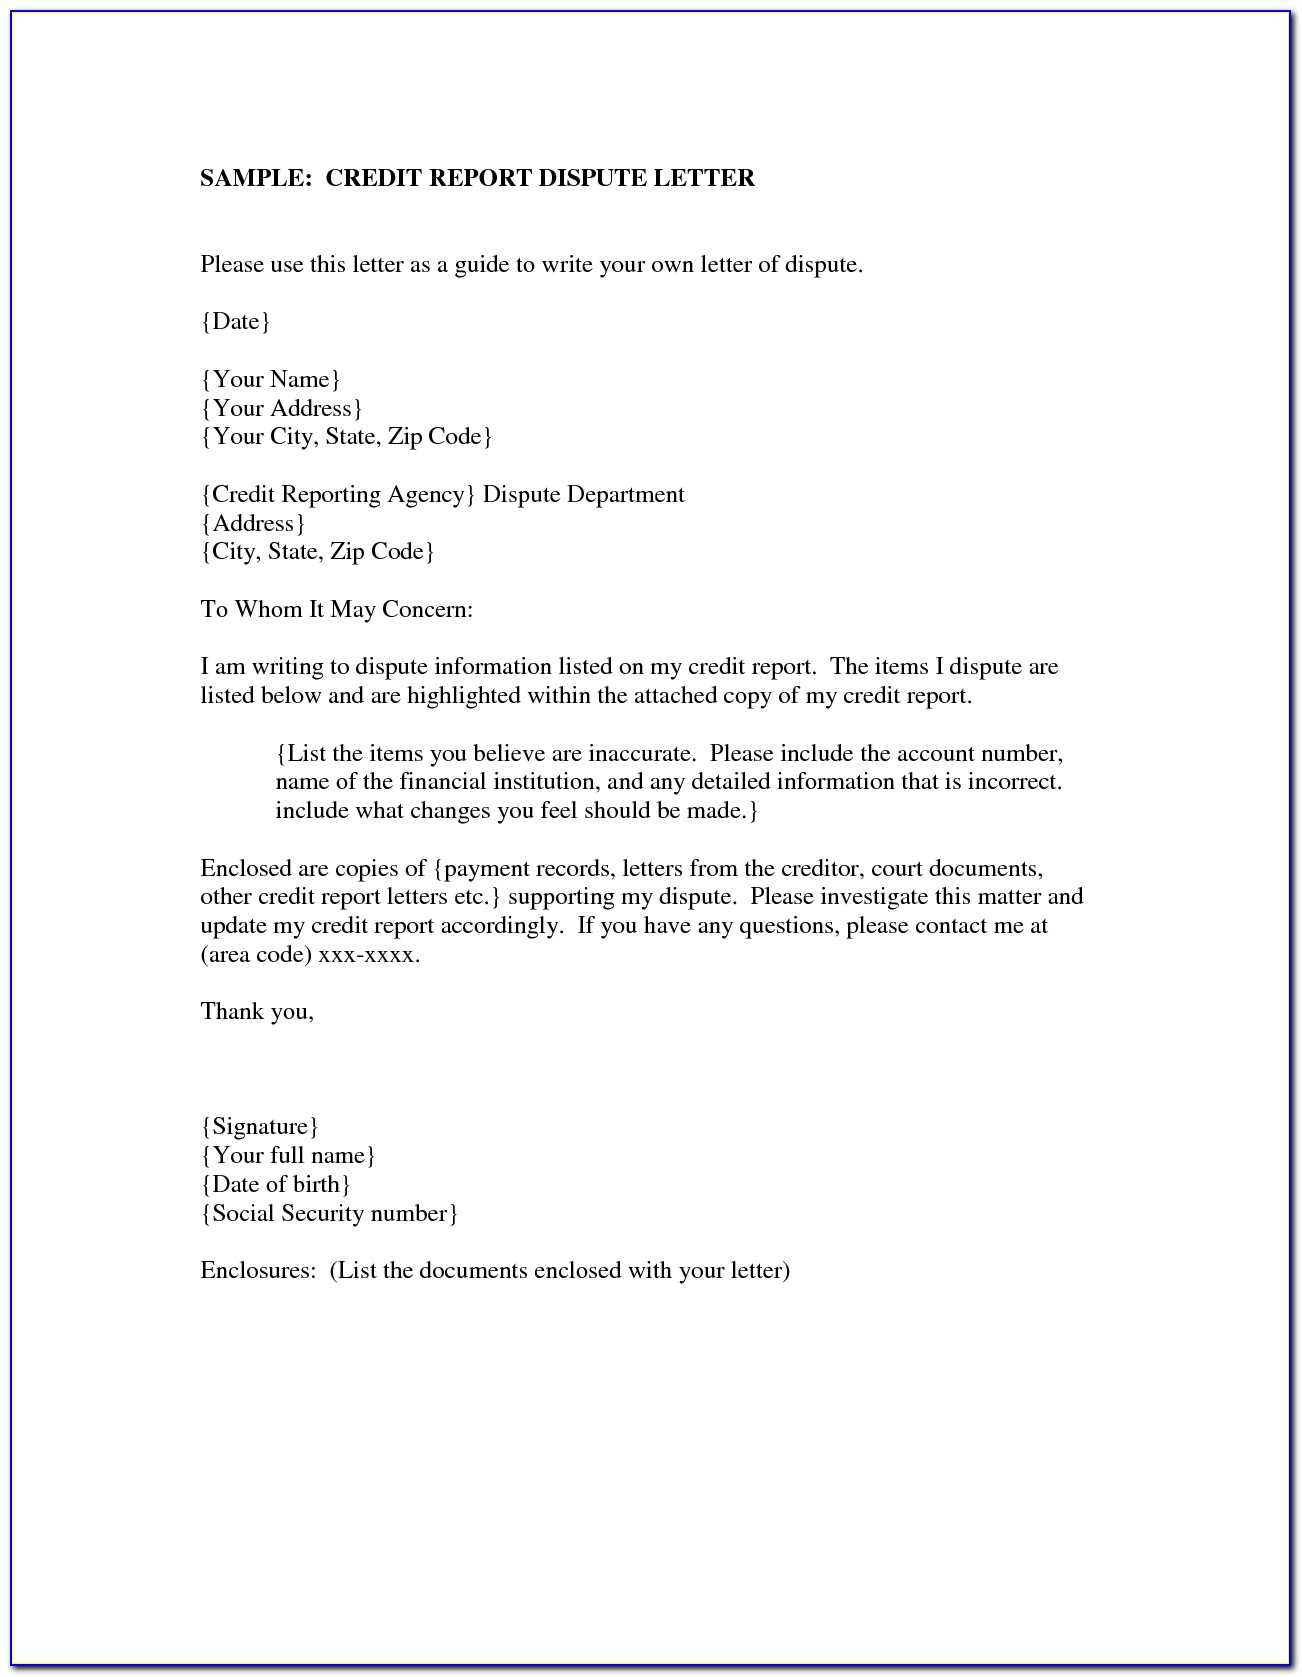 Dispute Credit Report Letter | | Best Business Template For Pertaining To Credit Report Dispute Letter Template